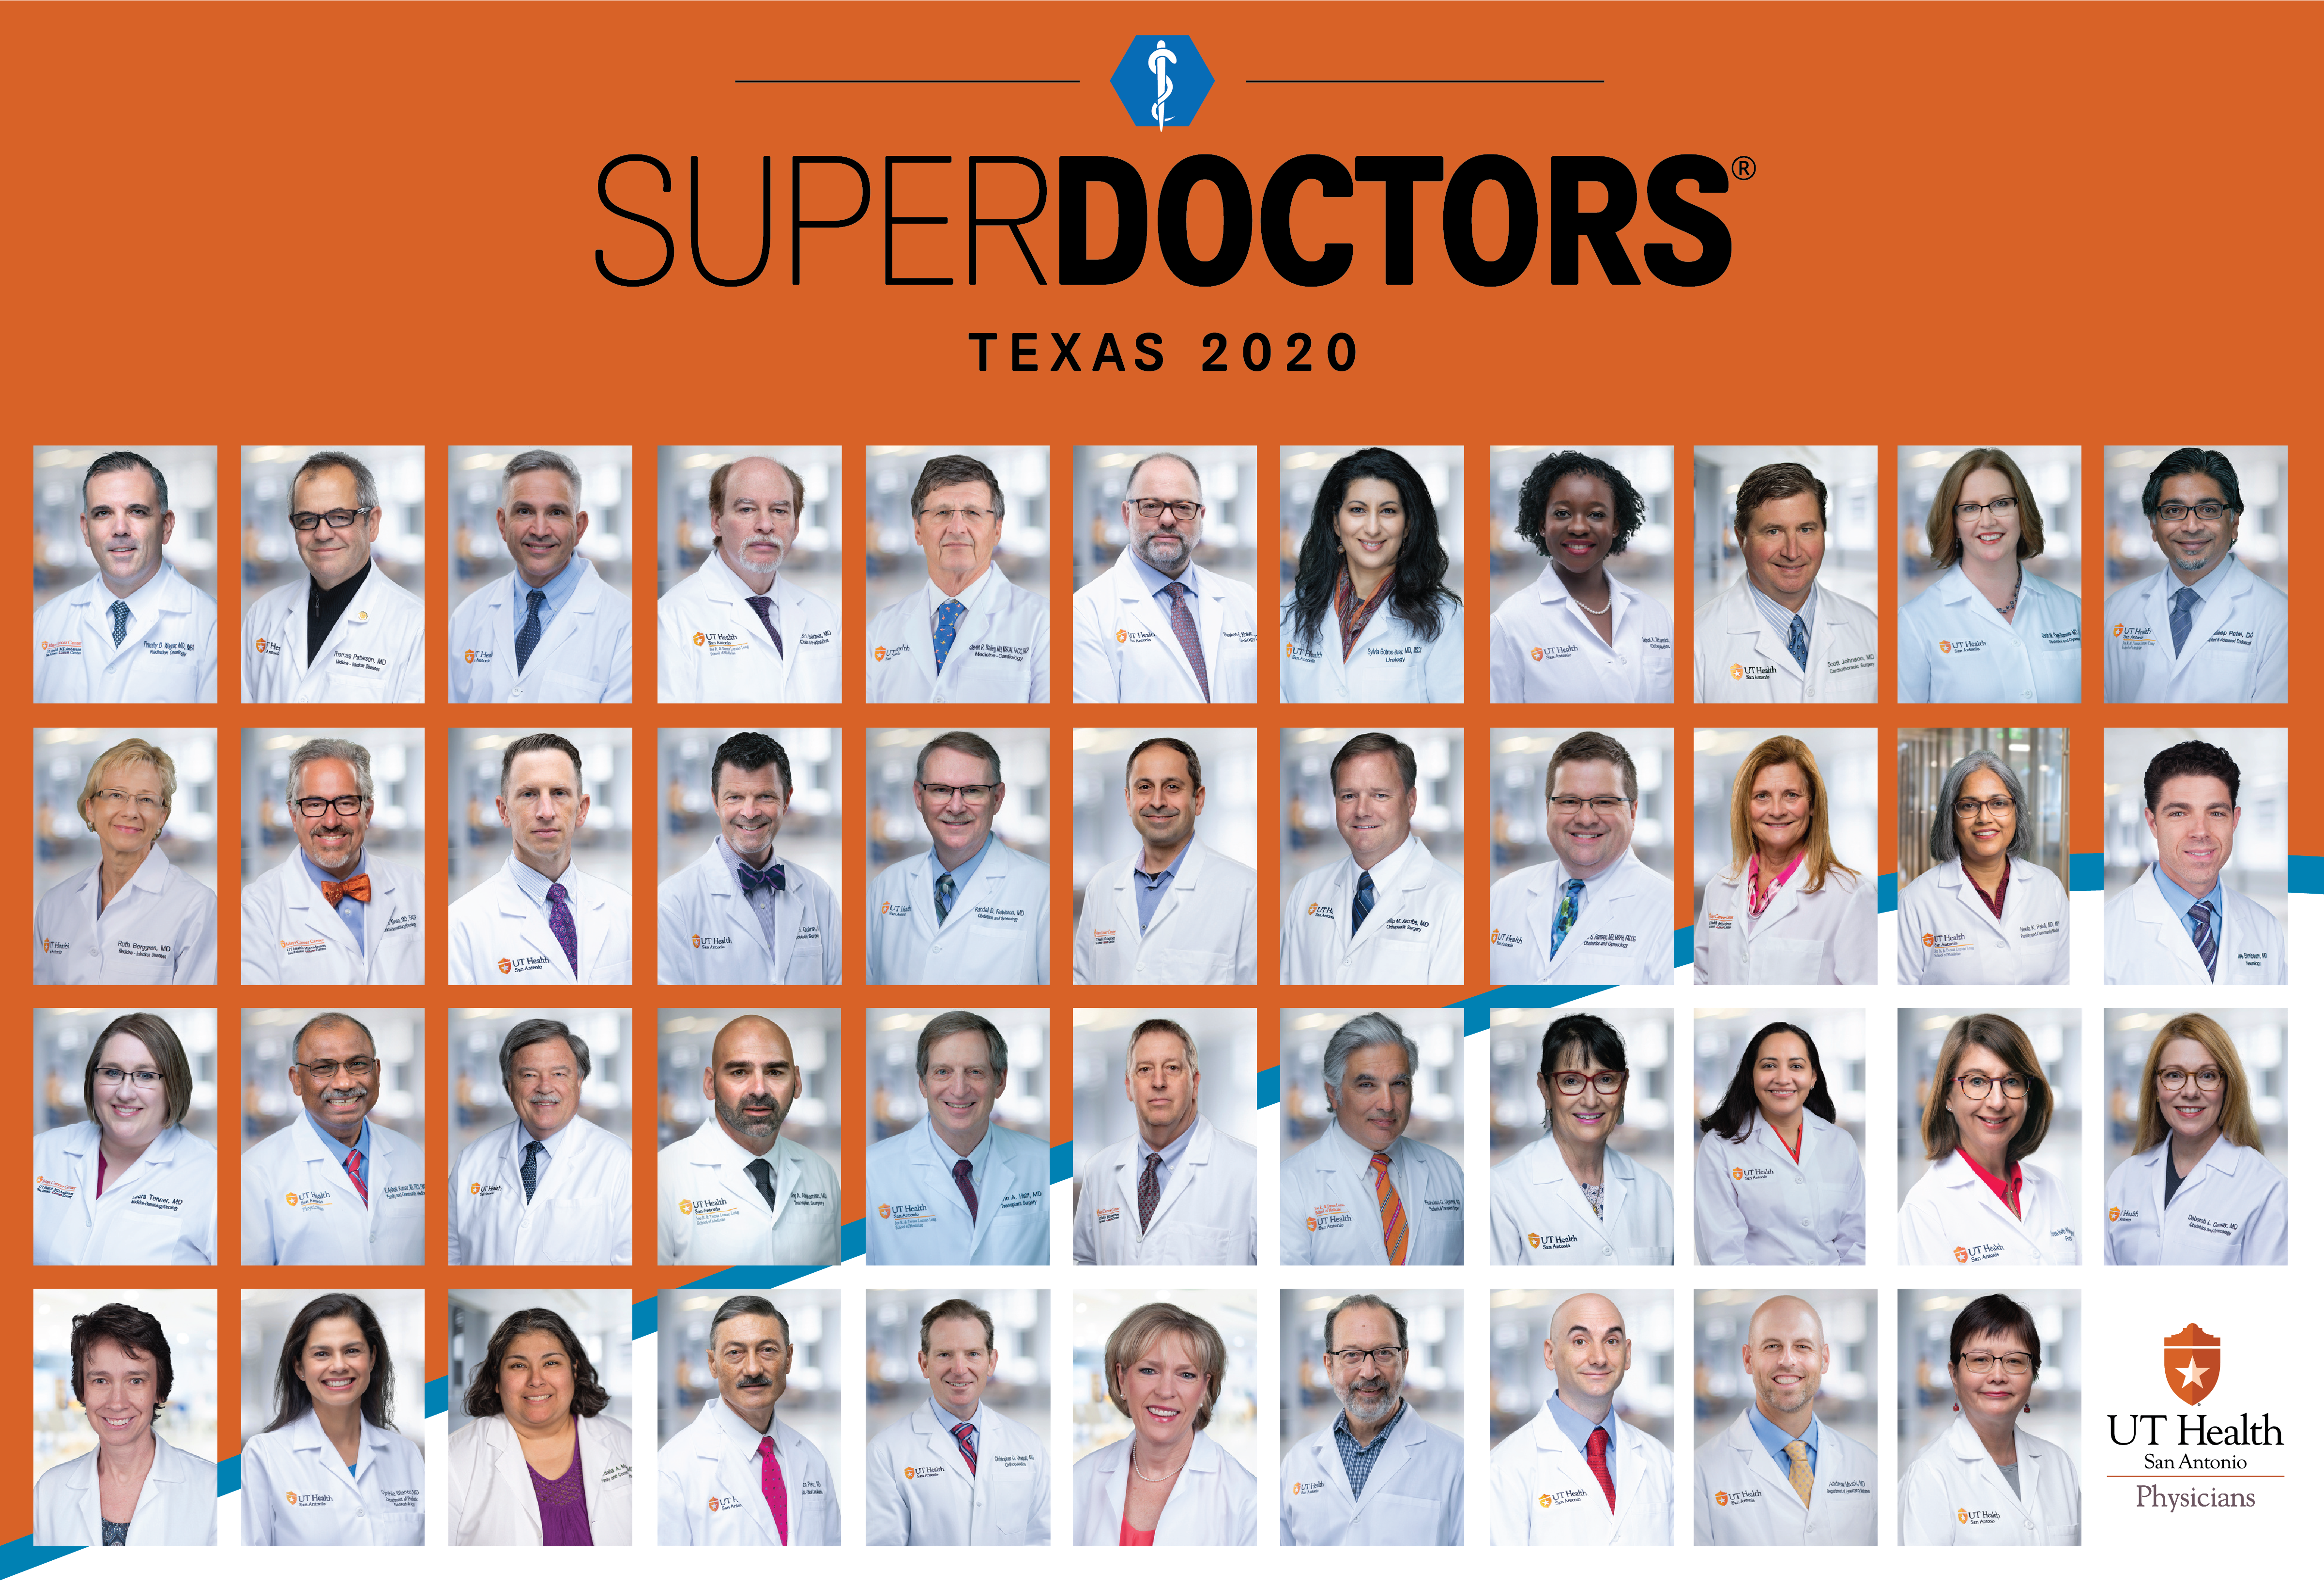 photograph displaying the Super Doctor awardees